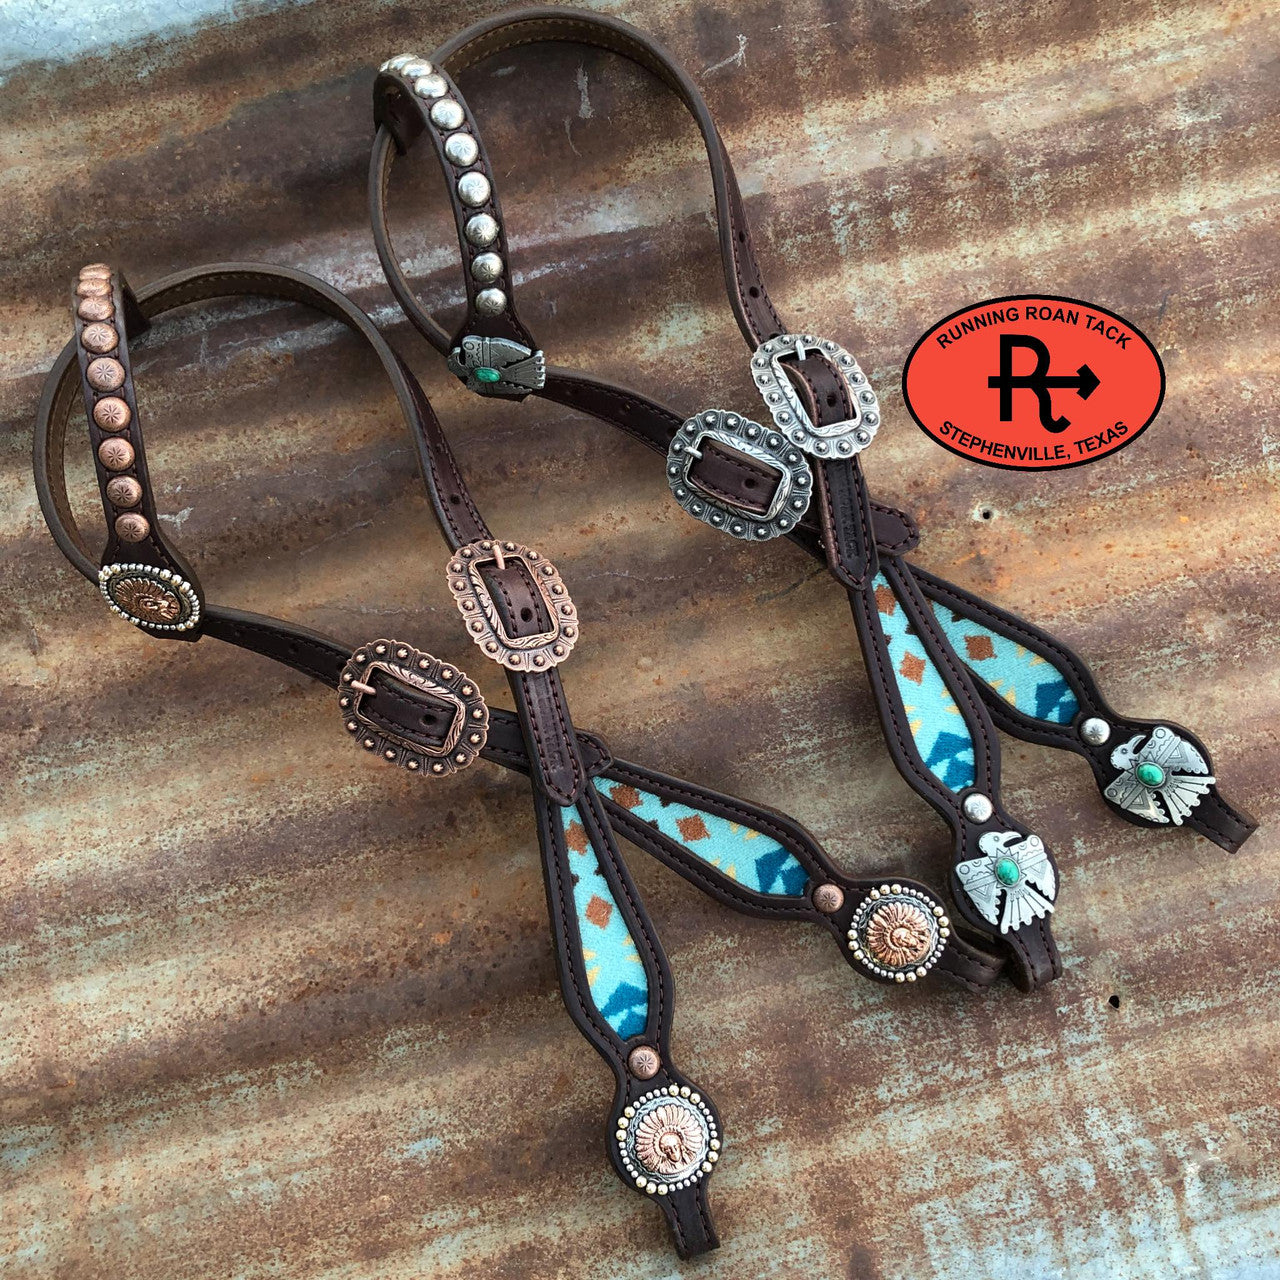 "Rancho Arroyo Aqua" Single Ear Standard Size Headstall with Your Choice of Hardware